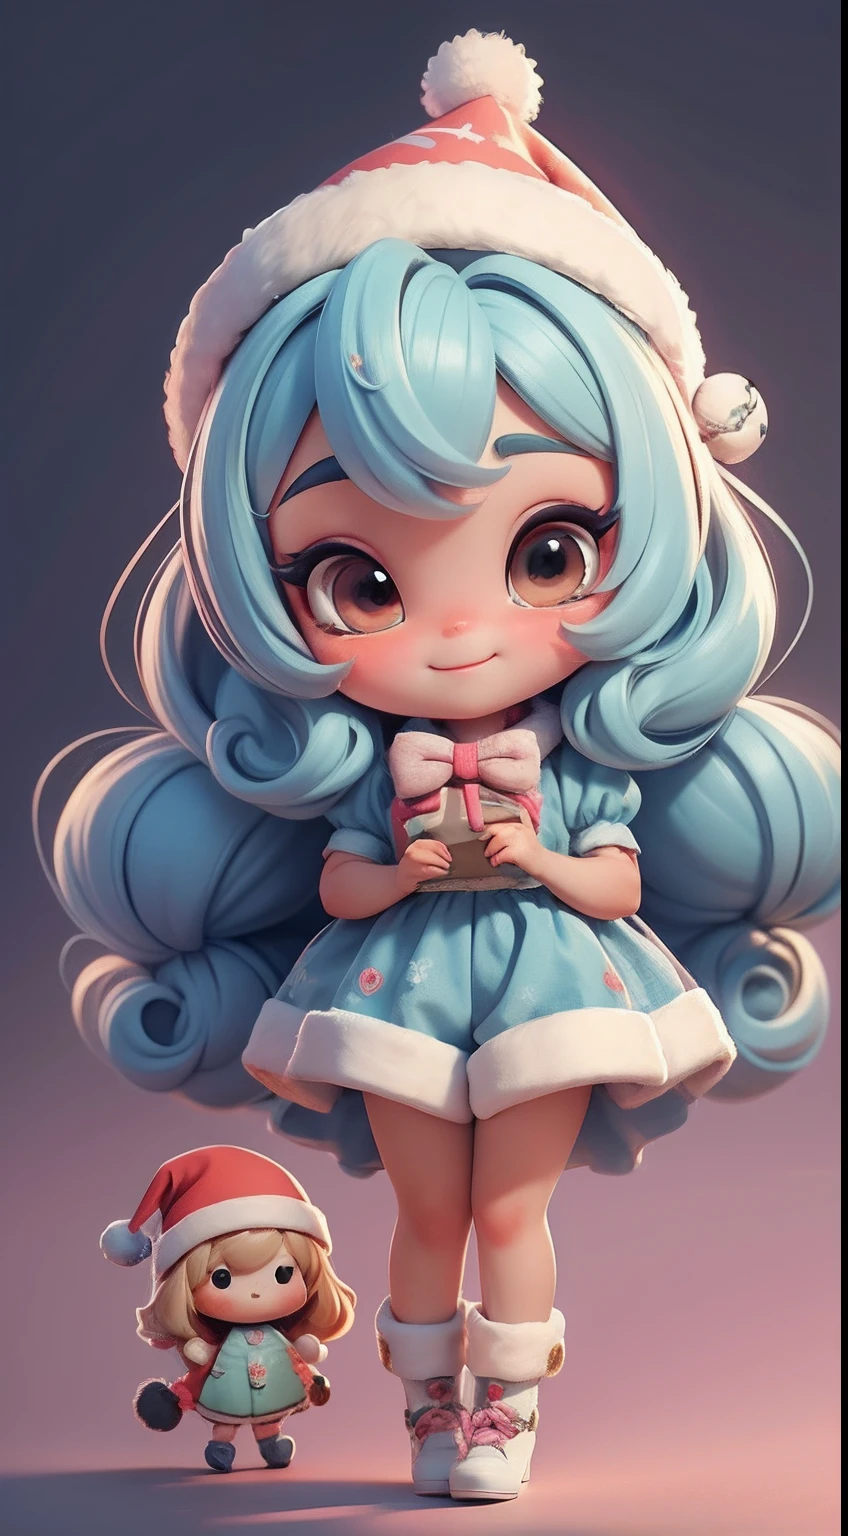 Create a series of  chibi style dolls with a cute Christmas theme, sorridente e fofo, each with lots of detail and in an 8K resolution. All dolls should follow the same solid background pattern and be complete in the image, mostrando o (corpo inteiro, incluindo as pernas: 1.5)

Boneco Natal: Chame-a de Beto. Ela deve ter cabelos em tons coloridos e natalinos. Seus olhos devem ser grandes e brilhantes, with long eyelashes and rosy cheeks. Must be dressed in a jumpsuit in Christmas tones. She should wear a hat and have Christmas accessories on hand, while in the other has nothing. Don't forget the details, com detalhes coloridos e enfeites encantadores, sapato bonito

Certifique-se de adicionar sombras, texturas e detalhes nos cabelos, roupas, Cute accessories of each doll, to make them even more adorable and charming.